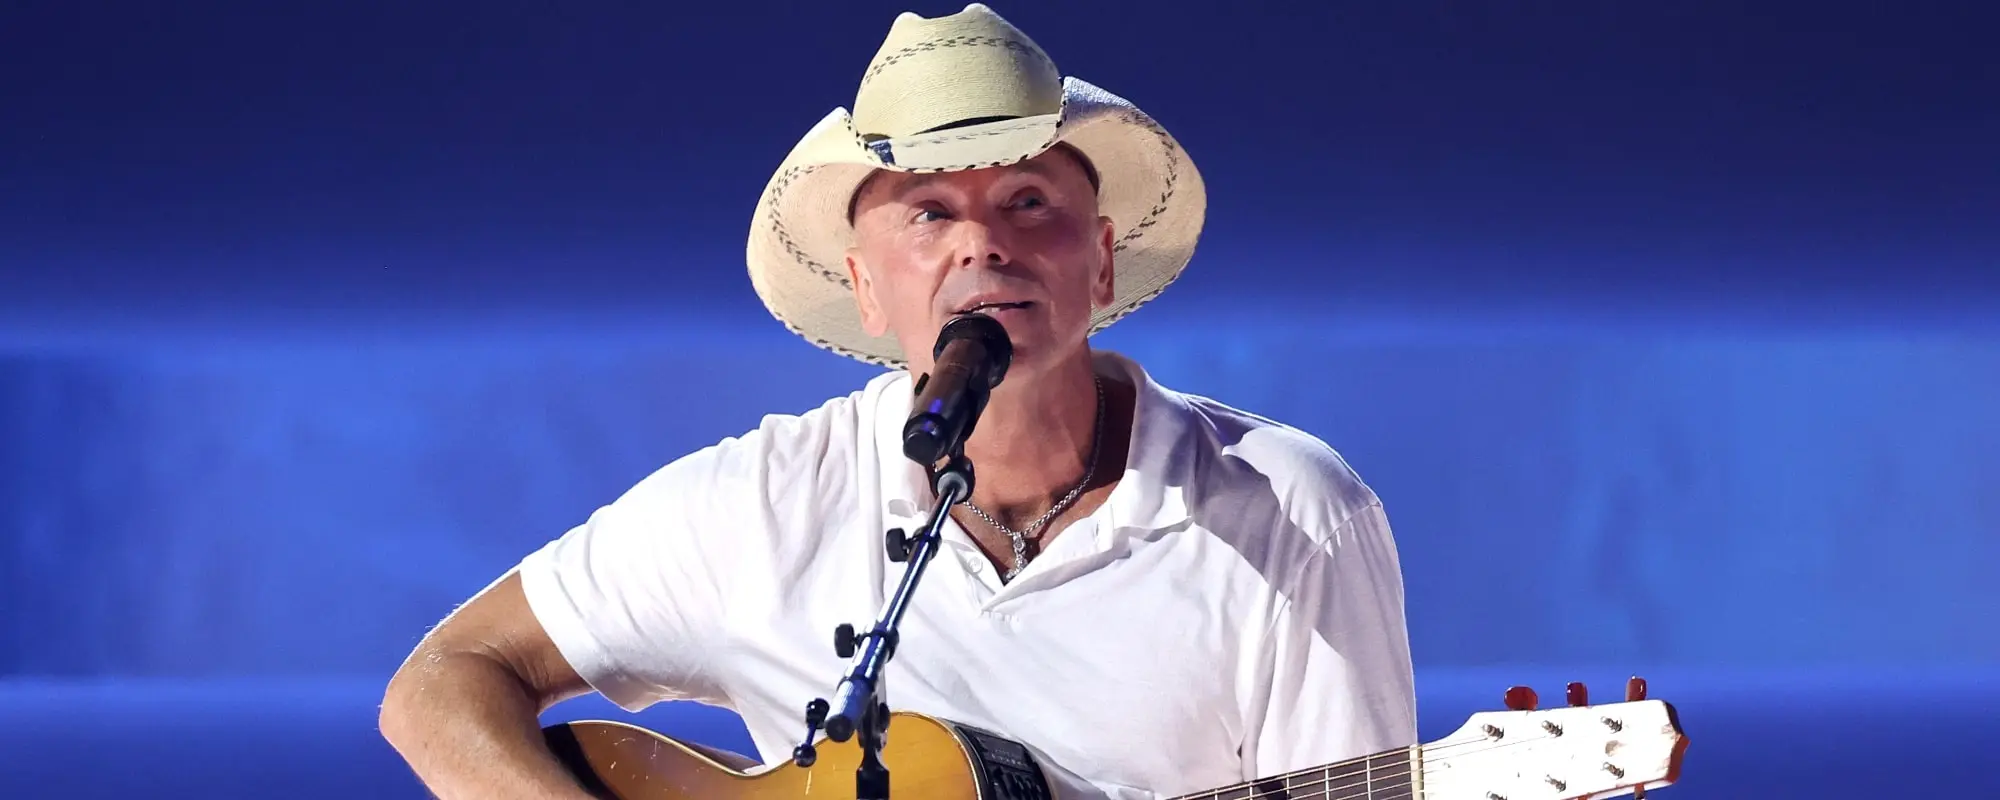 Kenny Chesney Reveals How He Uses Mindfulness and Gratitude to Avoid Complacency